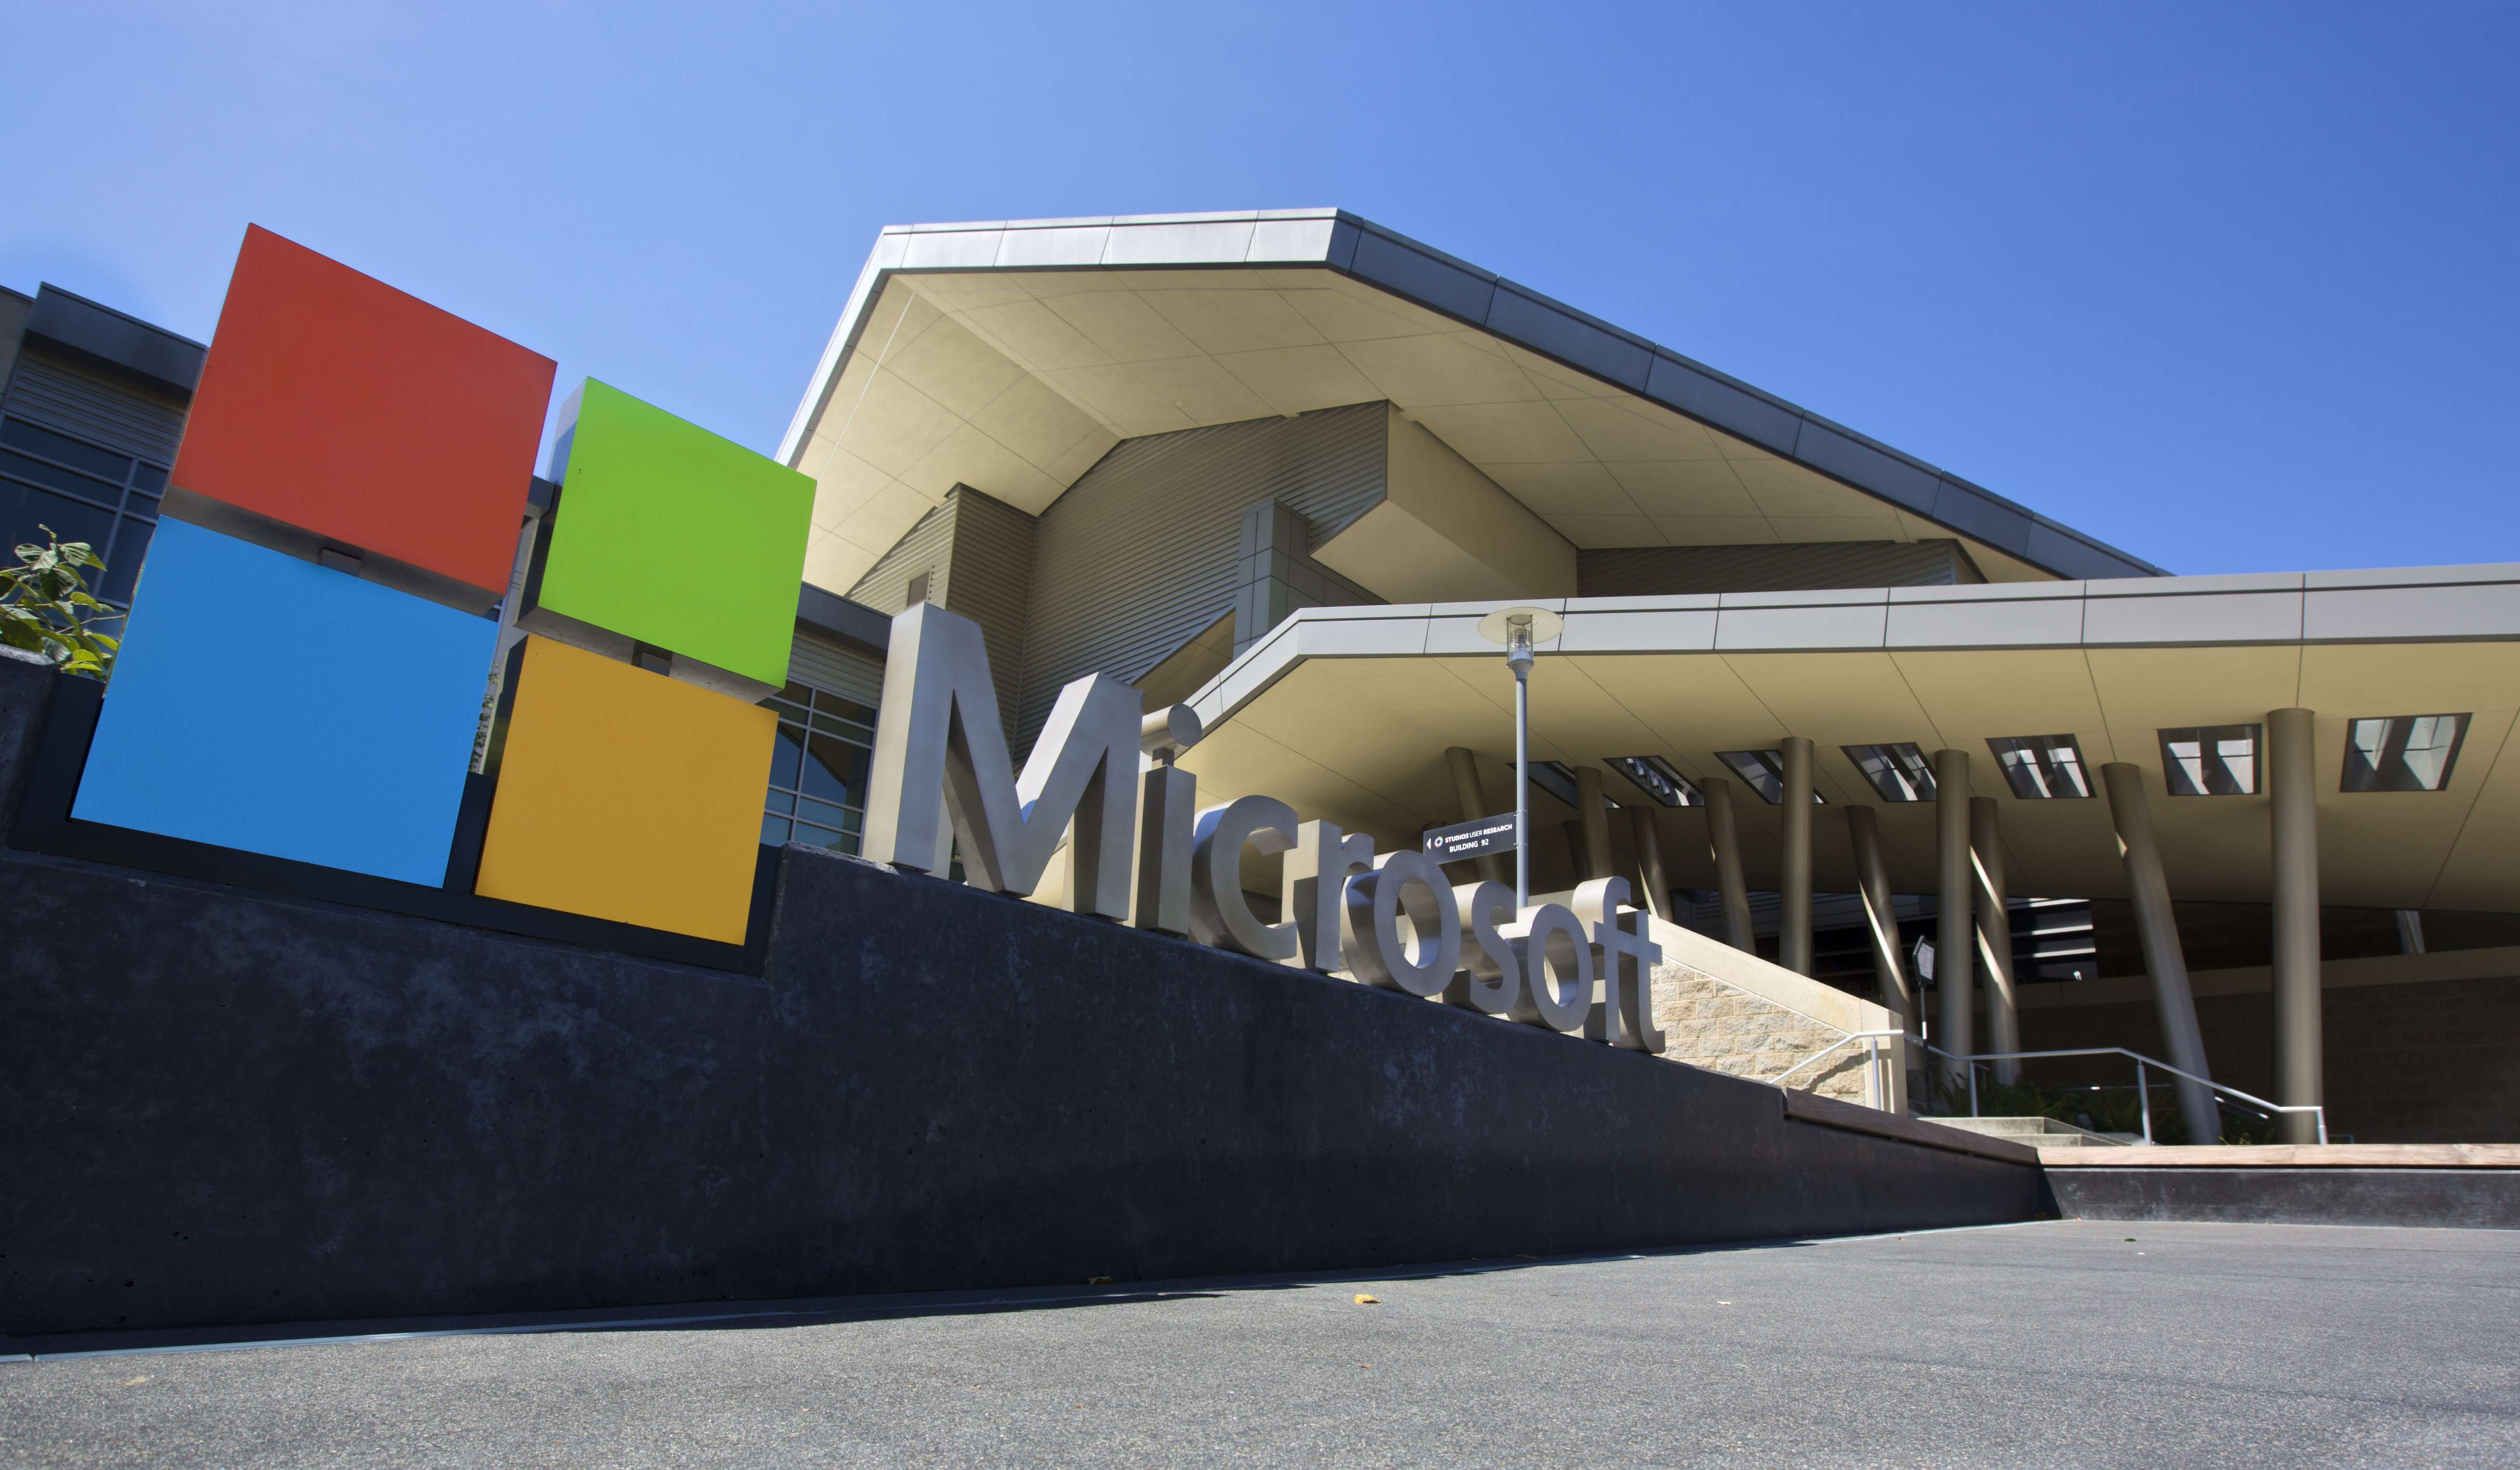 Amazon, Microsoft launch initiatives to accelerate COVID-19 research and testing